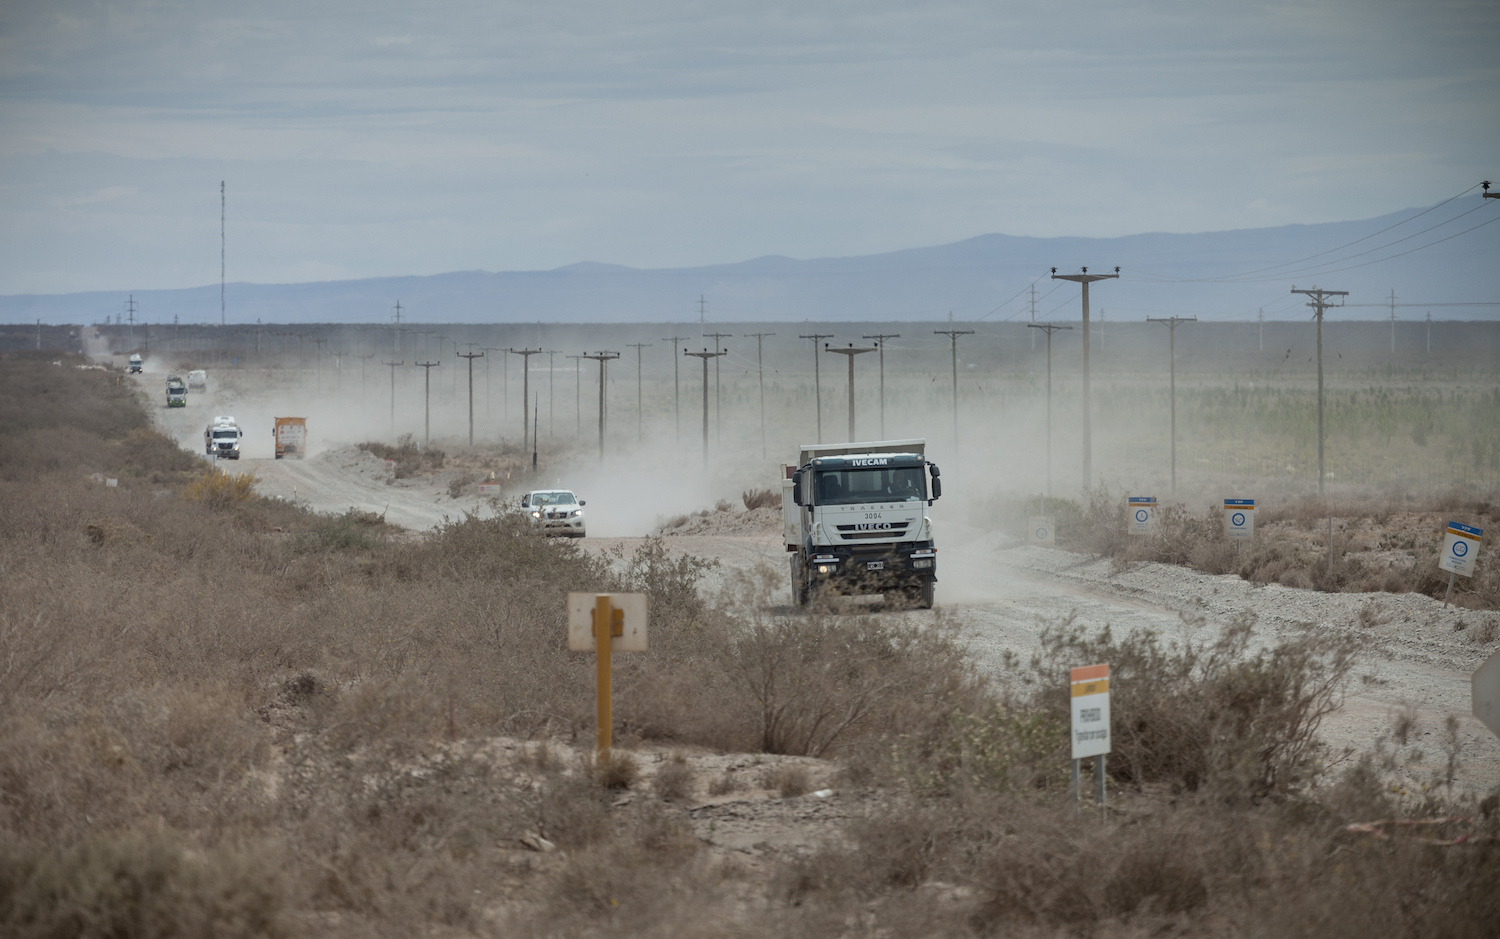 Convoys of trucks clog unpaved roads in the Vaca Muerta shale of Argentina